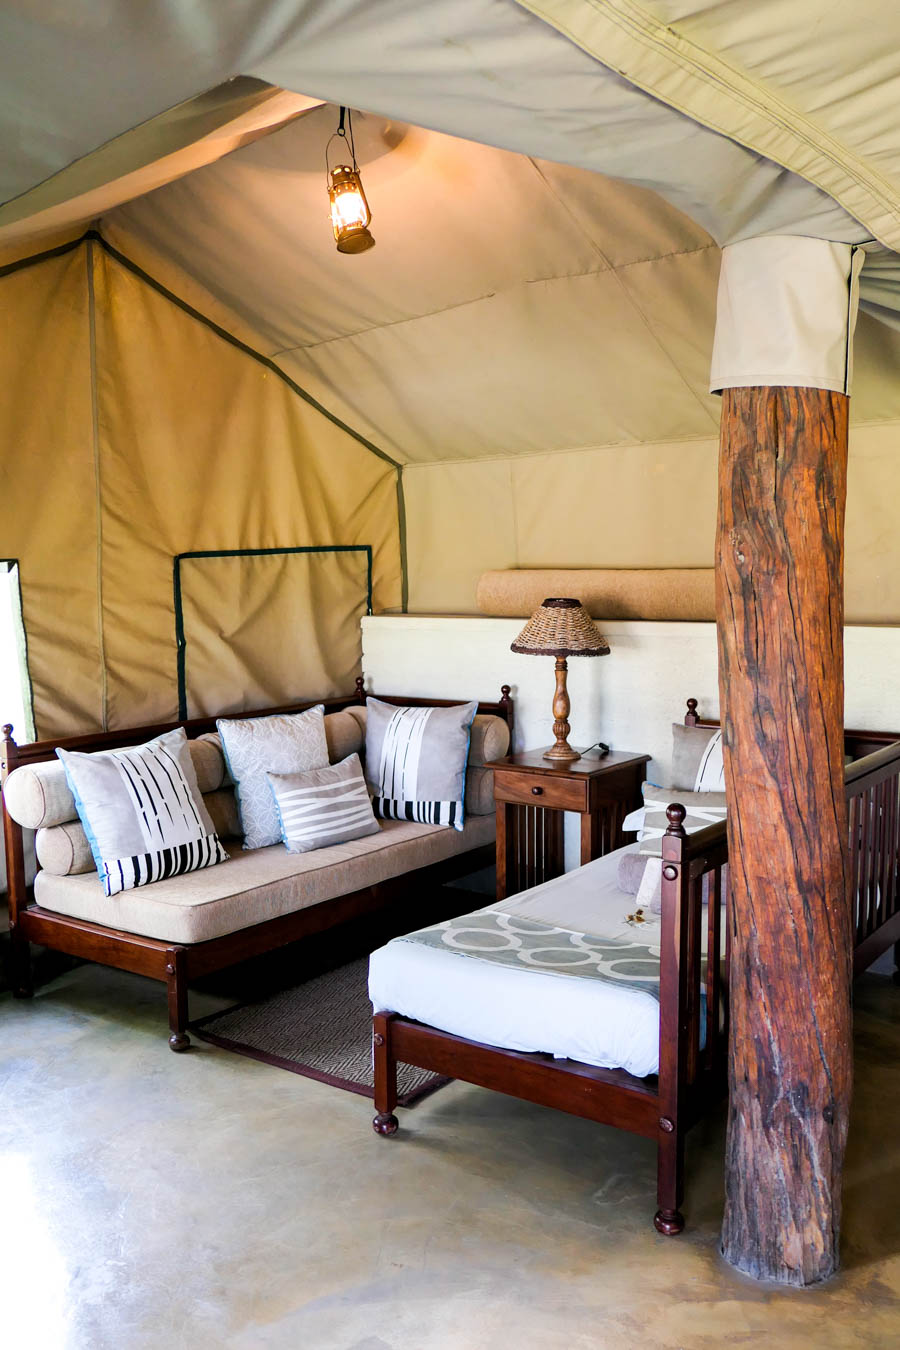 Where to Stay in Hwange National Park - The Hide Photo Review